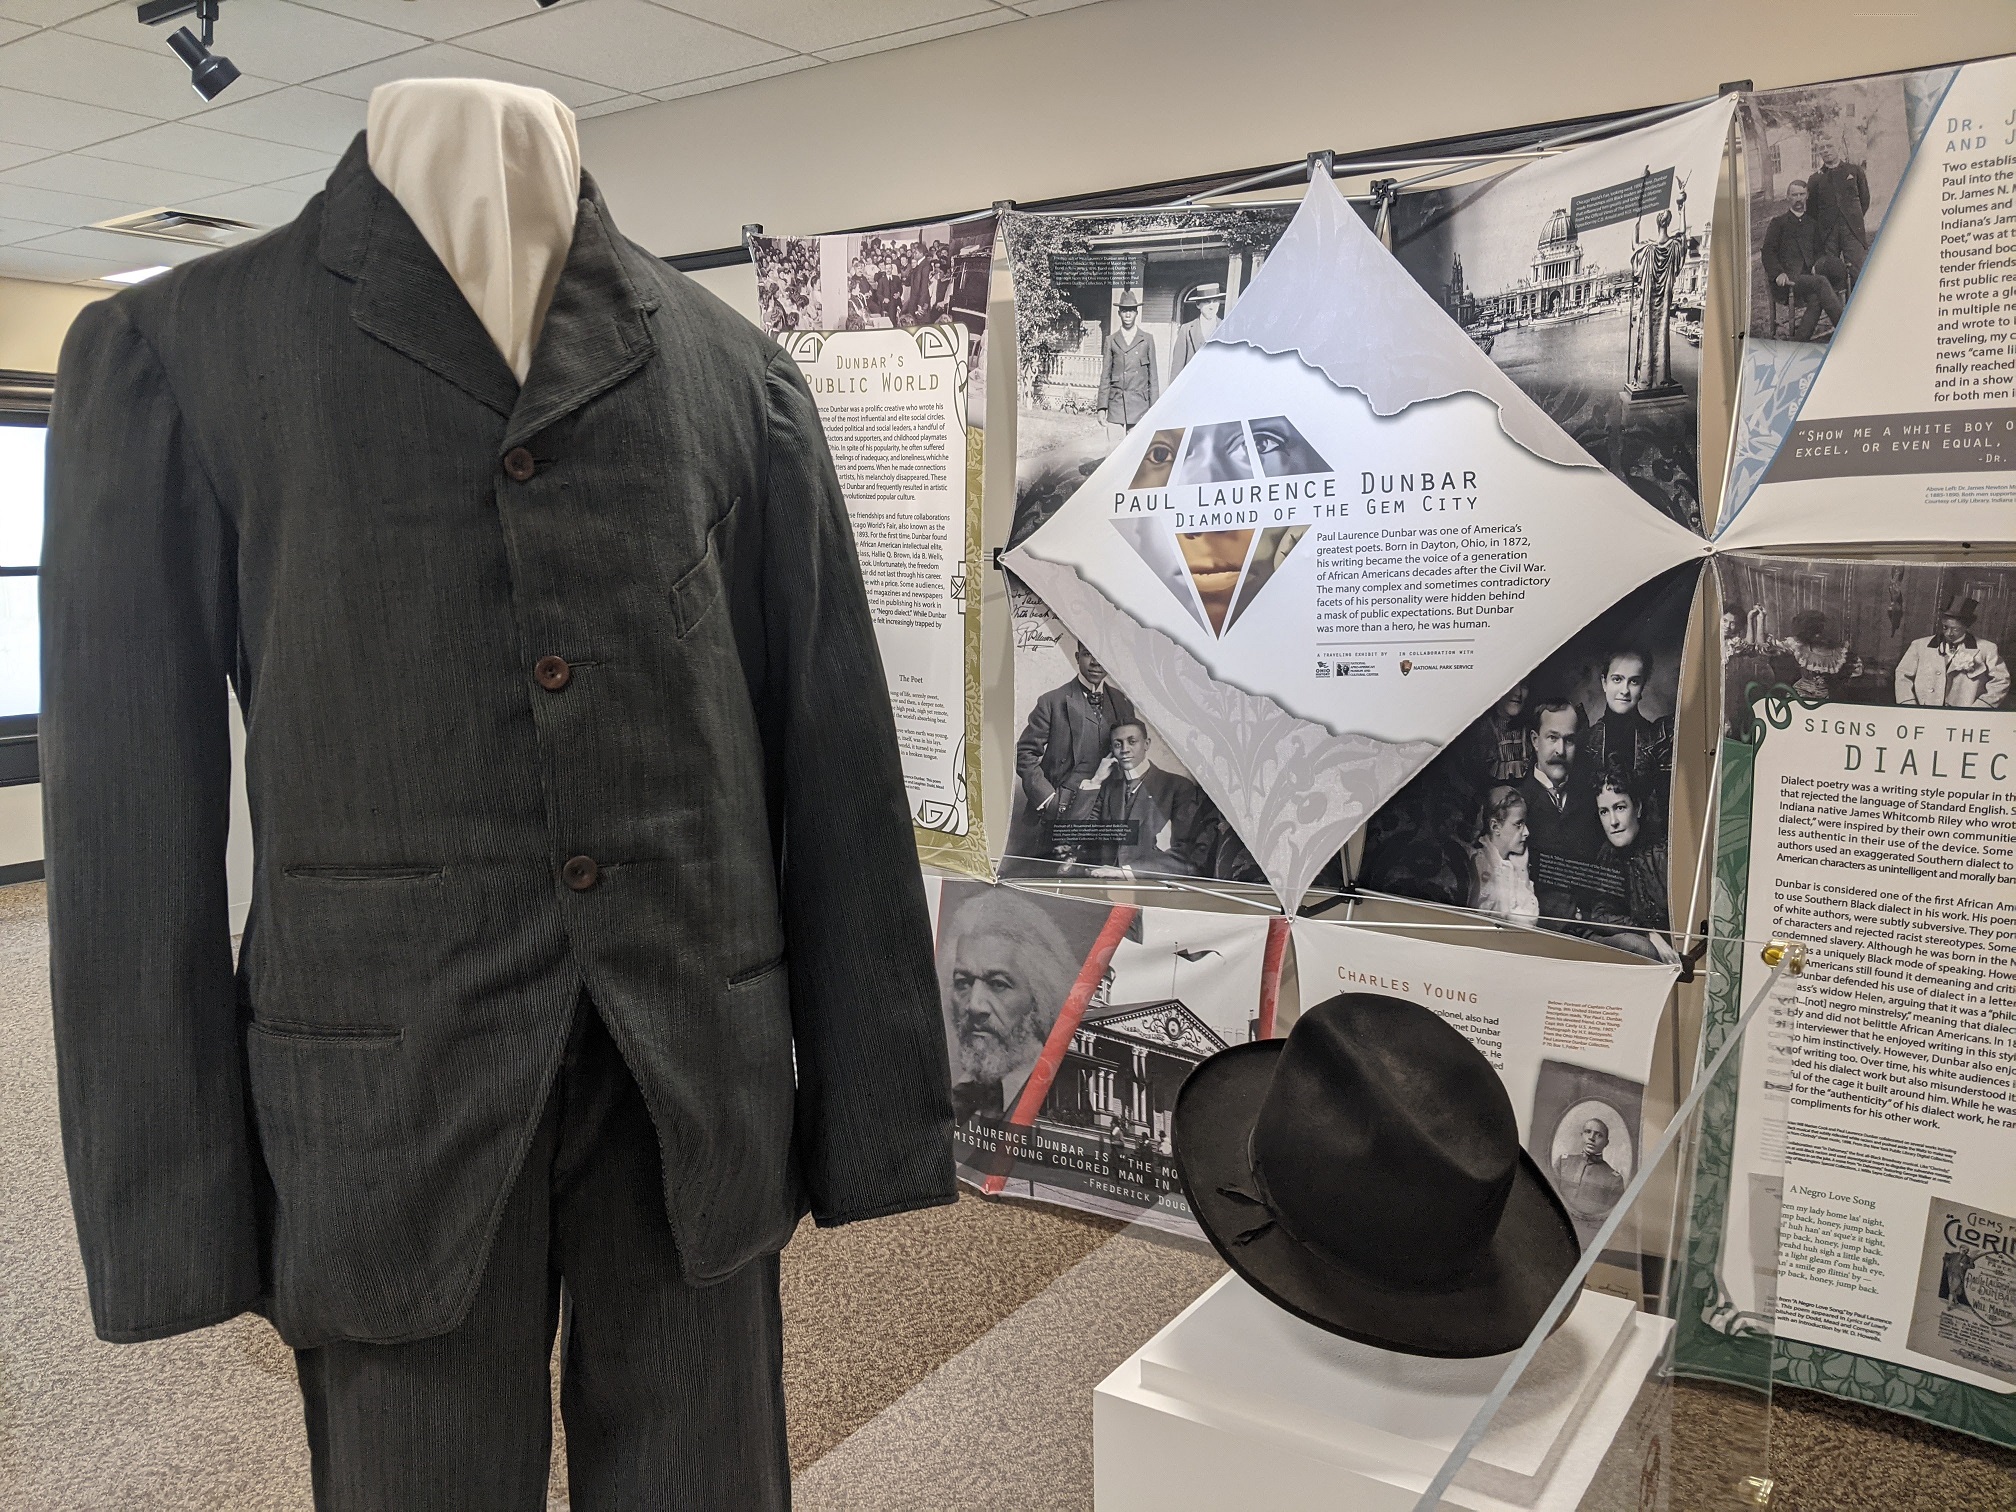 The new exhibition “Paul Laurence Dunbar: Diamond of the Gem City” opened on June 3 at the Paul Laurence Dunbar House in Dayton.  This cutout suit, pants and fedora from the Ohio History Connection collection belonged to Dunbar.  Popular in menswear of the 1890s, Dunbar was often photographed wearing suits, his head bowed and his expression subdued.  CONTRIBUTED/NATIONAL AFRICAN-AMERICAN MUSEUM AND CULTURAL CENTER